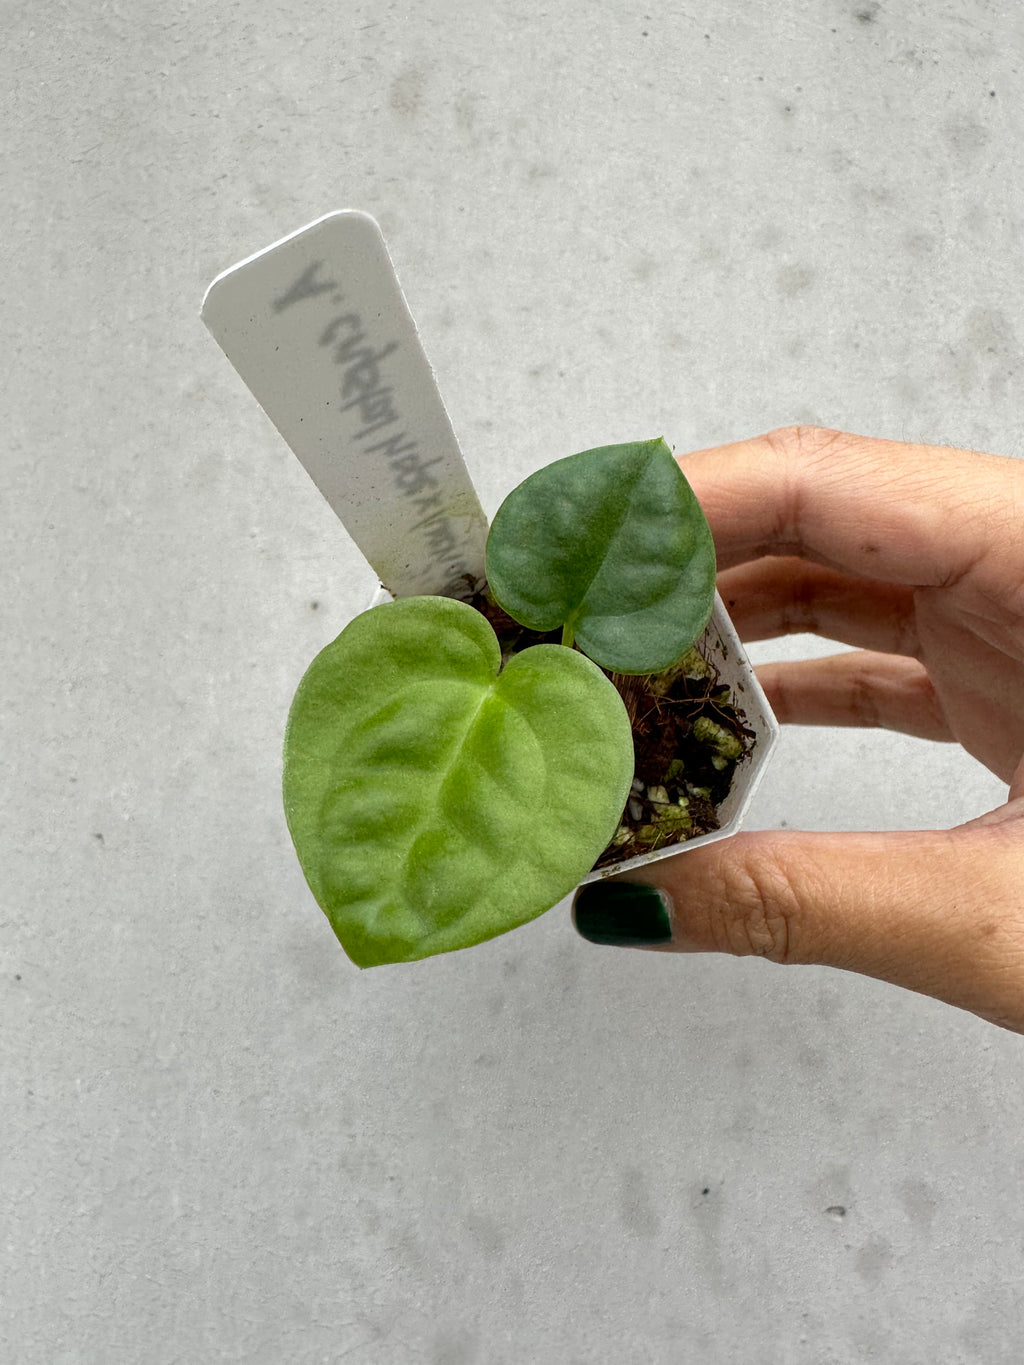 Anthurium Crystal hope x luxurians seedling (multiple available)